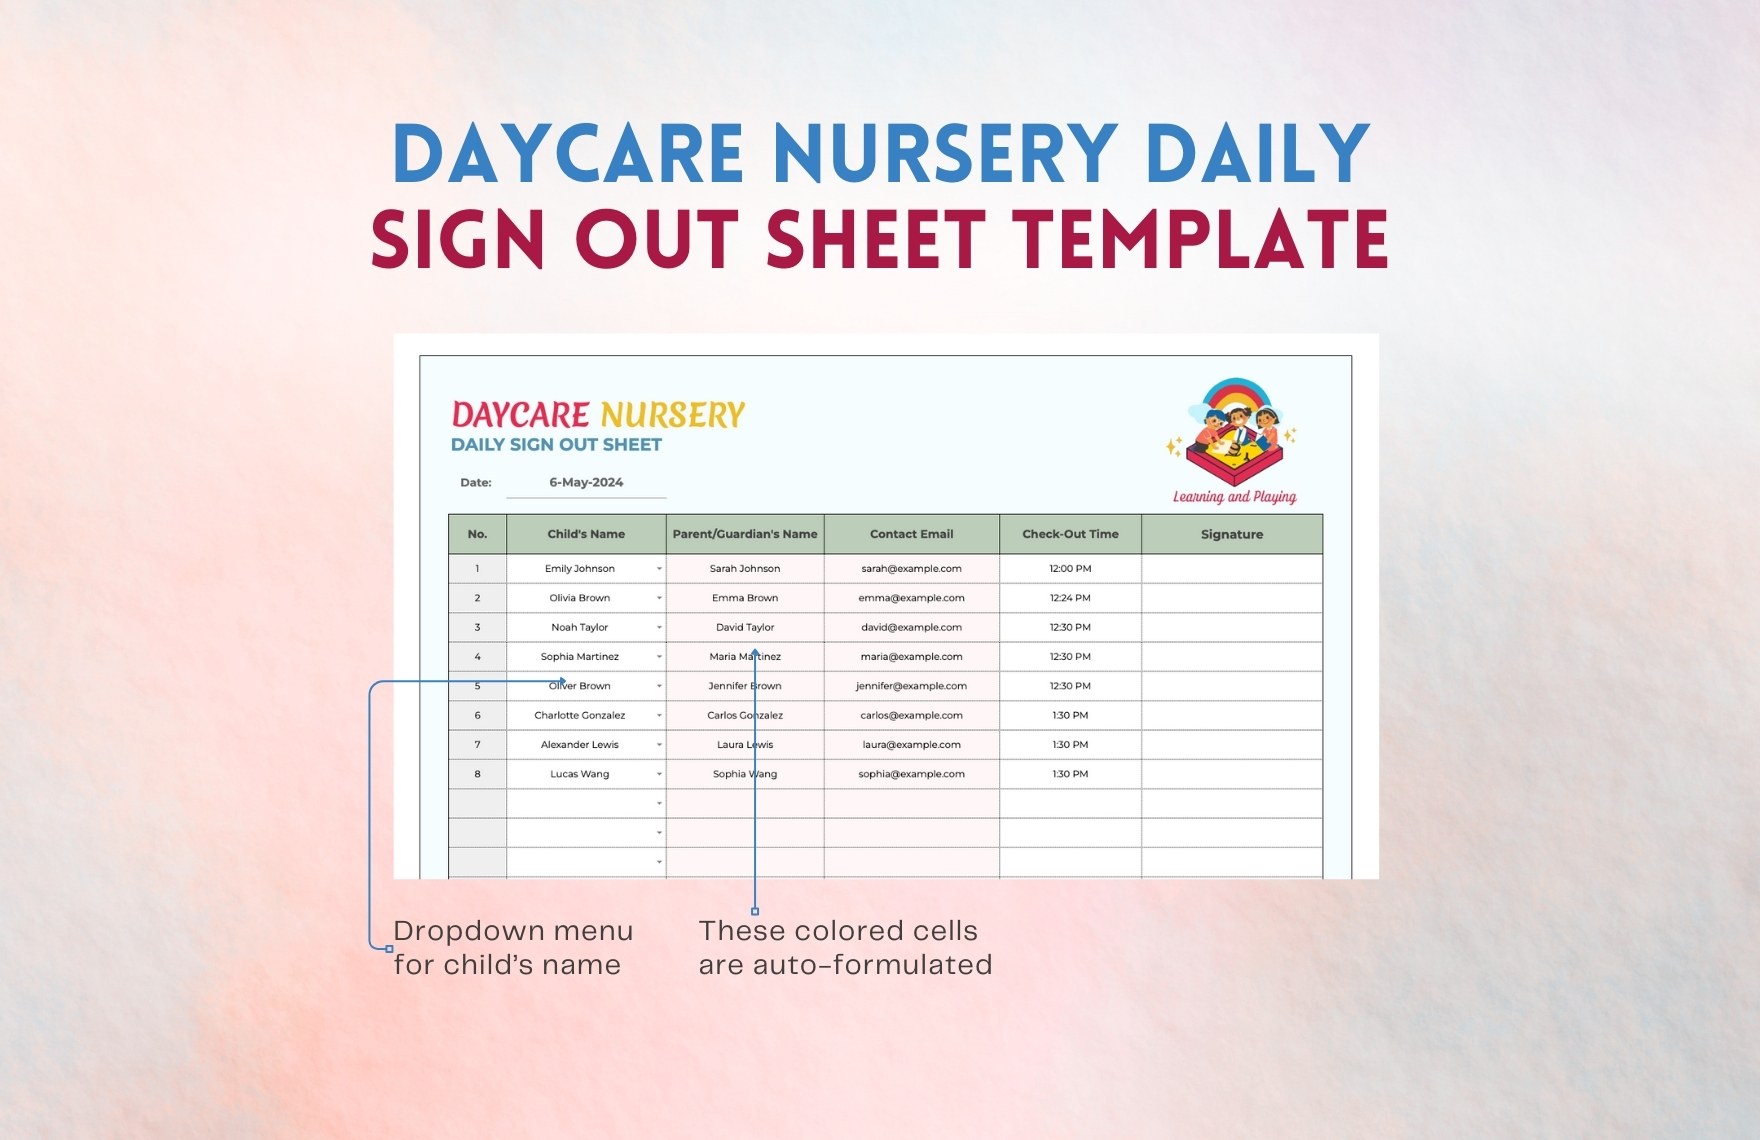 Daycare Nursery Daily Sign Out Sheet Template